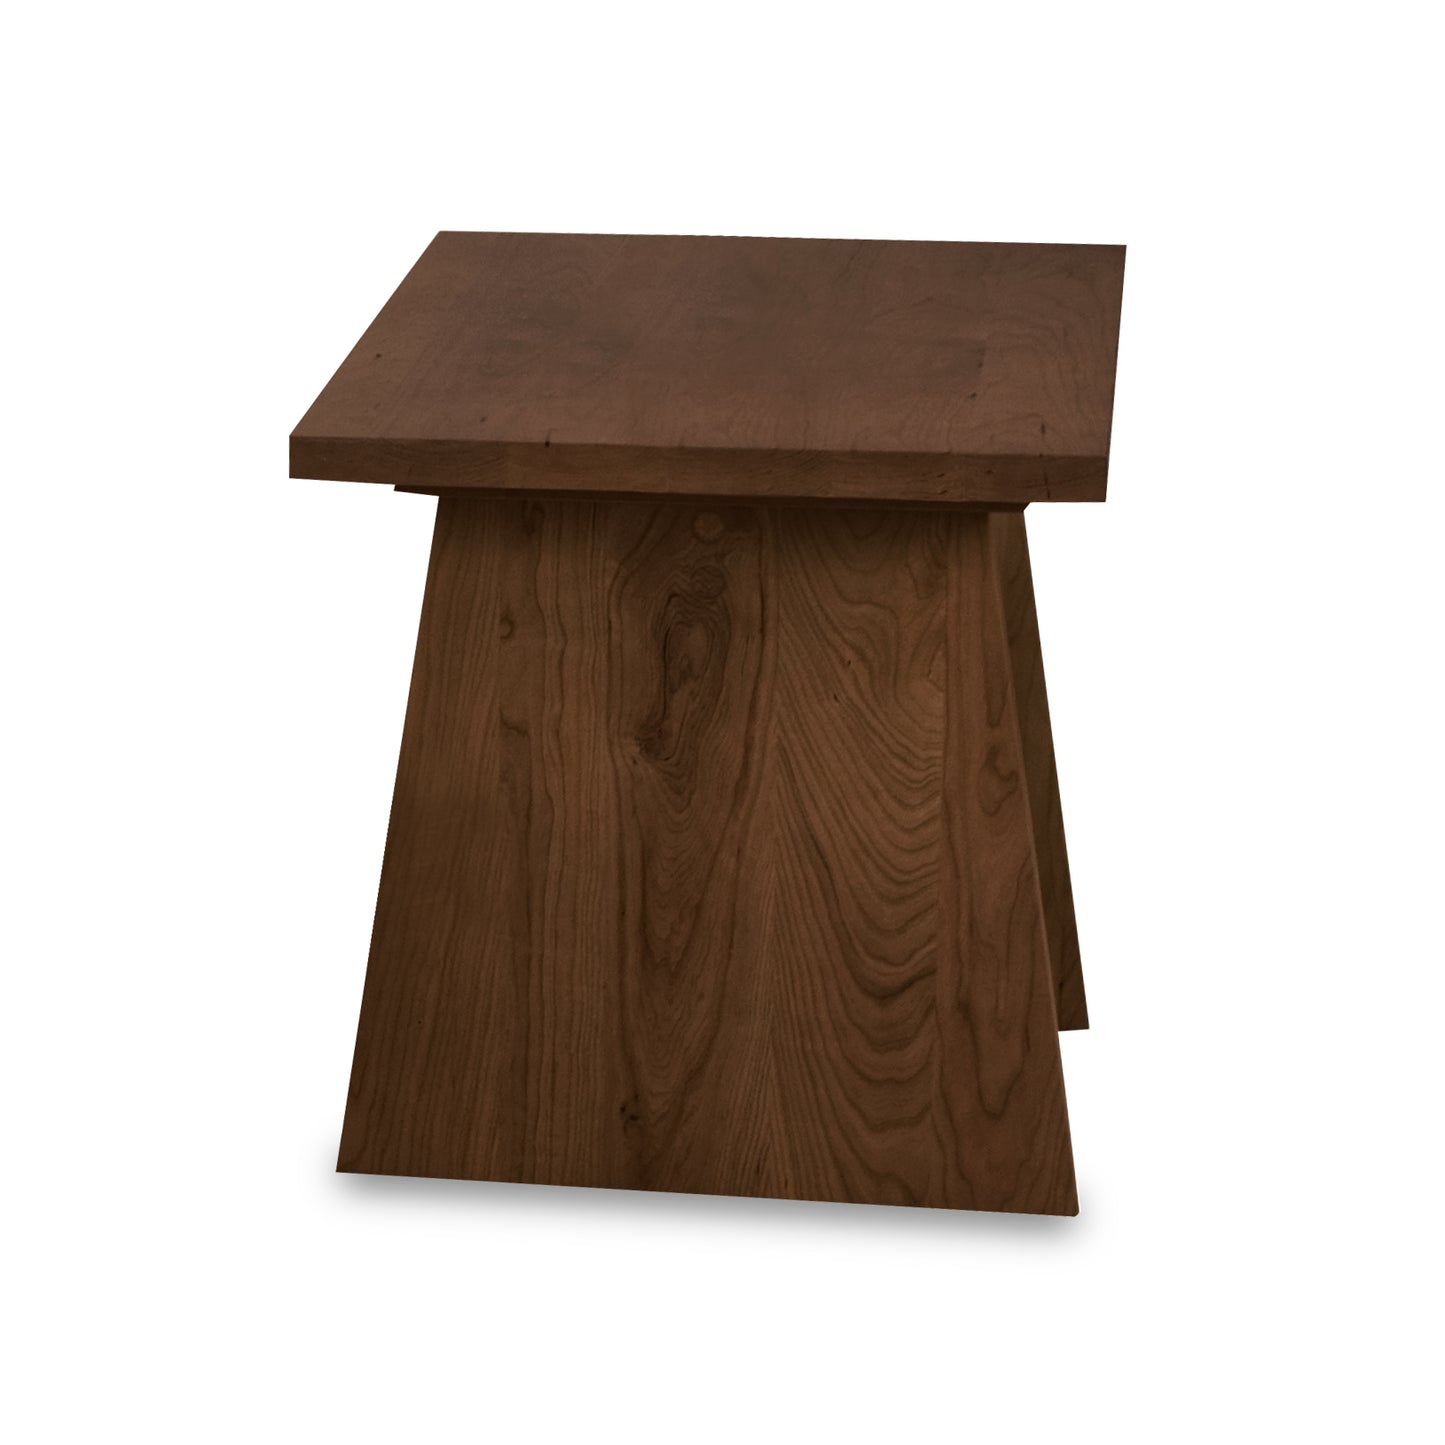 A Lyndon Furniture Modern Designer End Table with a square top.